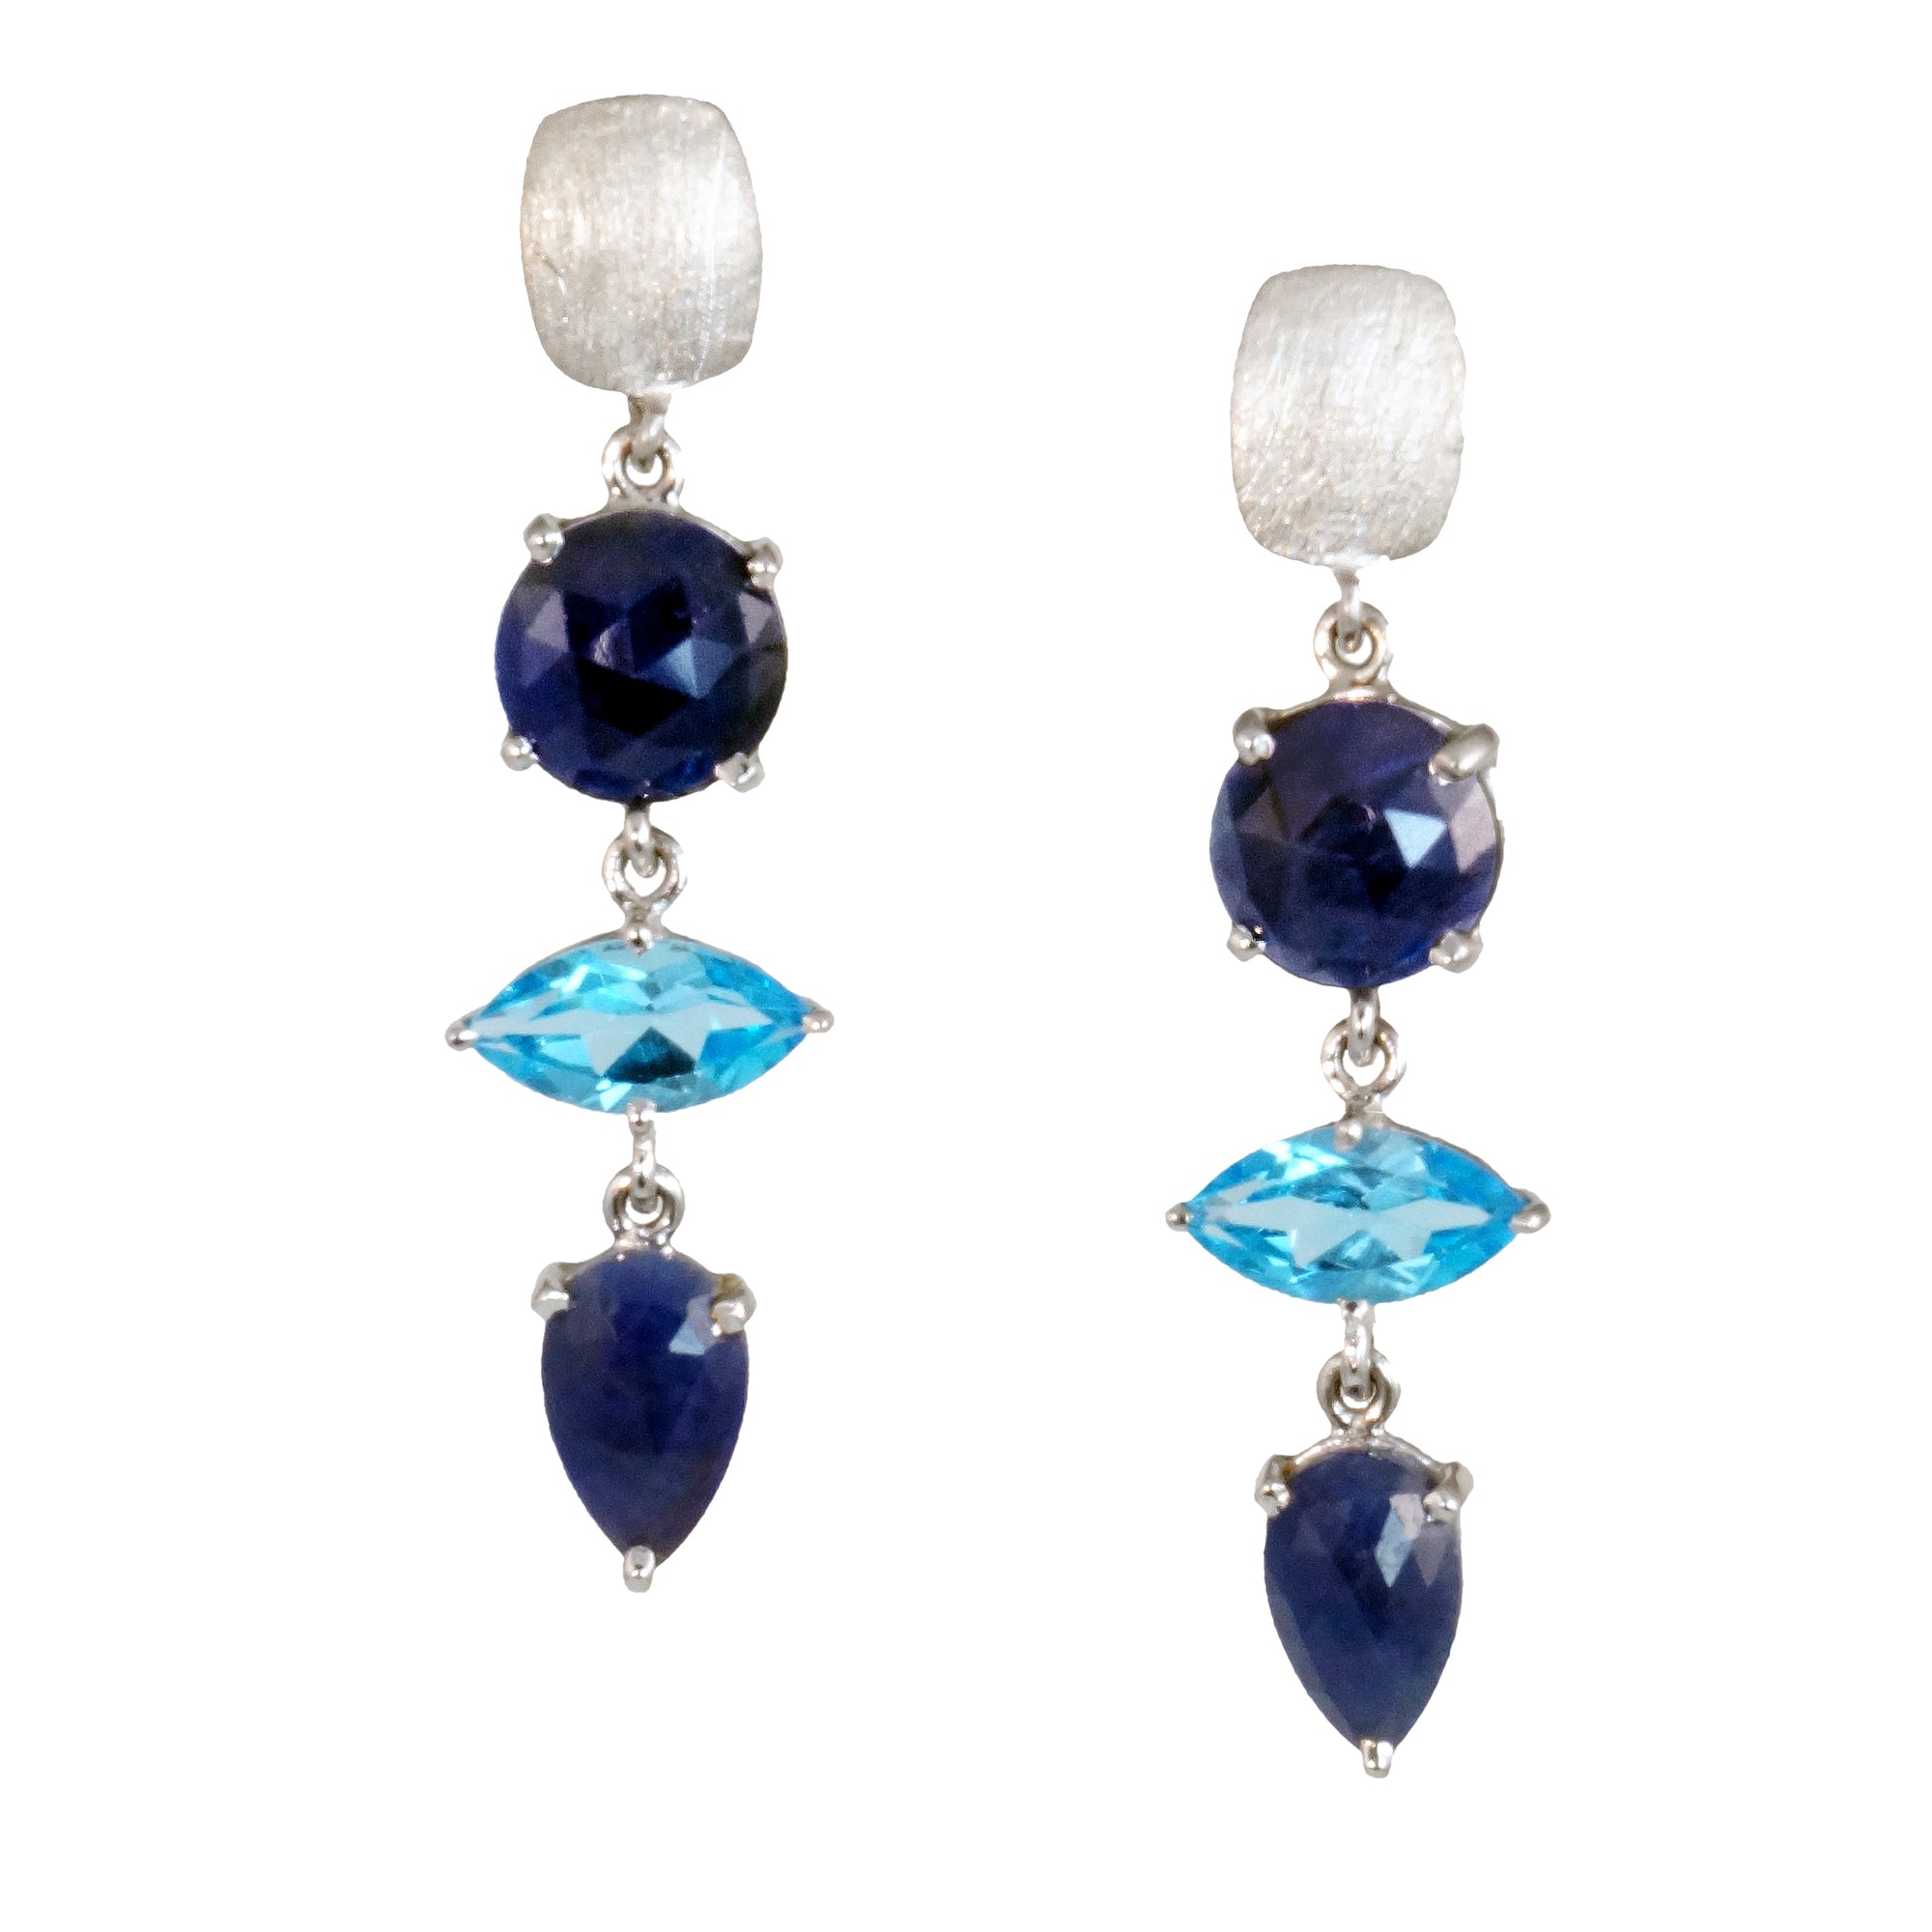 Rose Cut Blue Sapphire Slices with Blue Topaz Drop Earrings